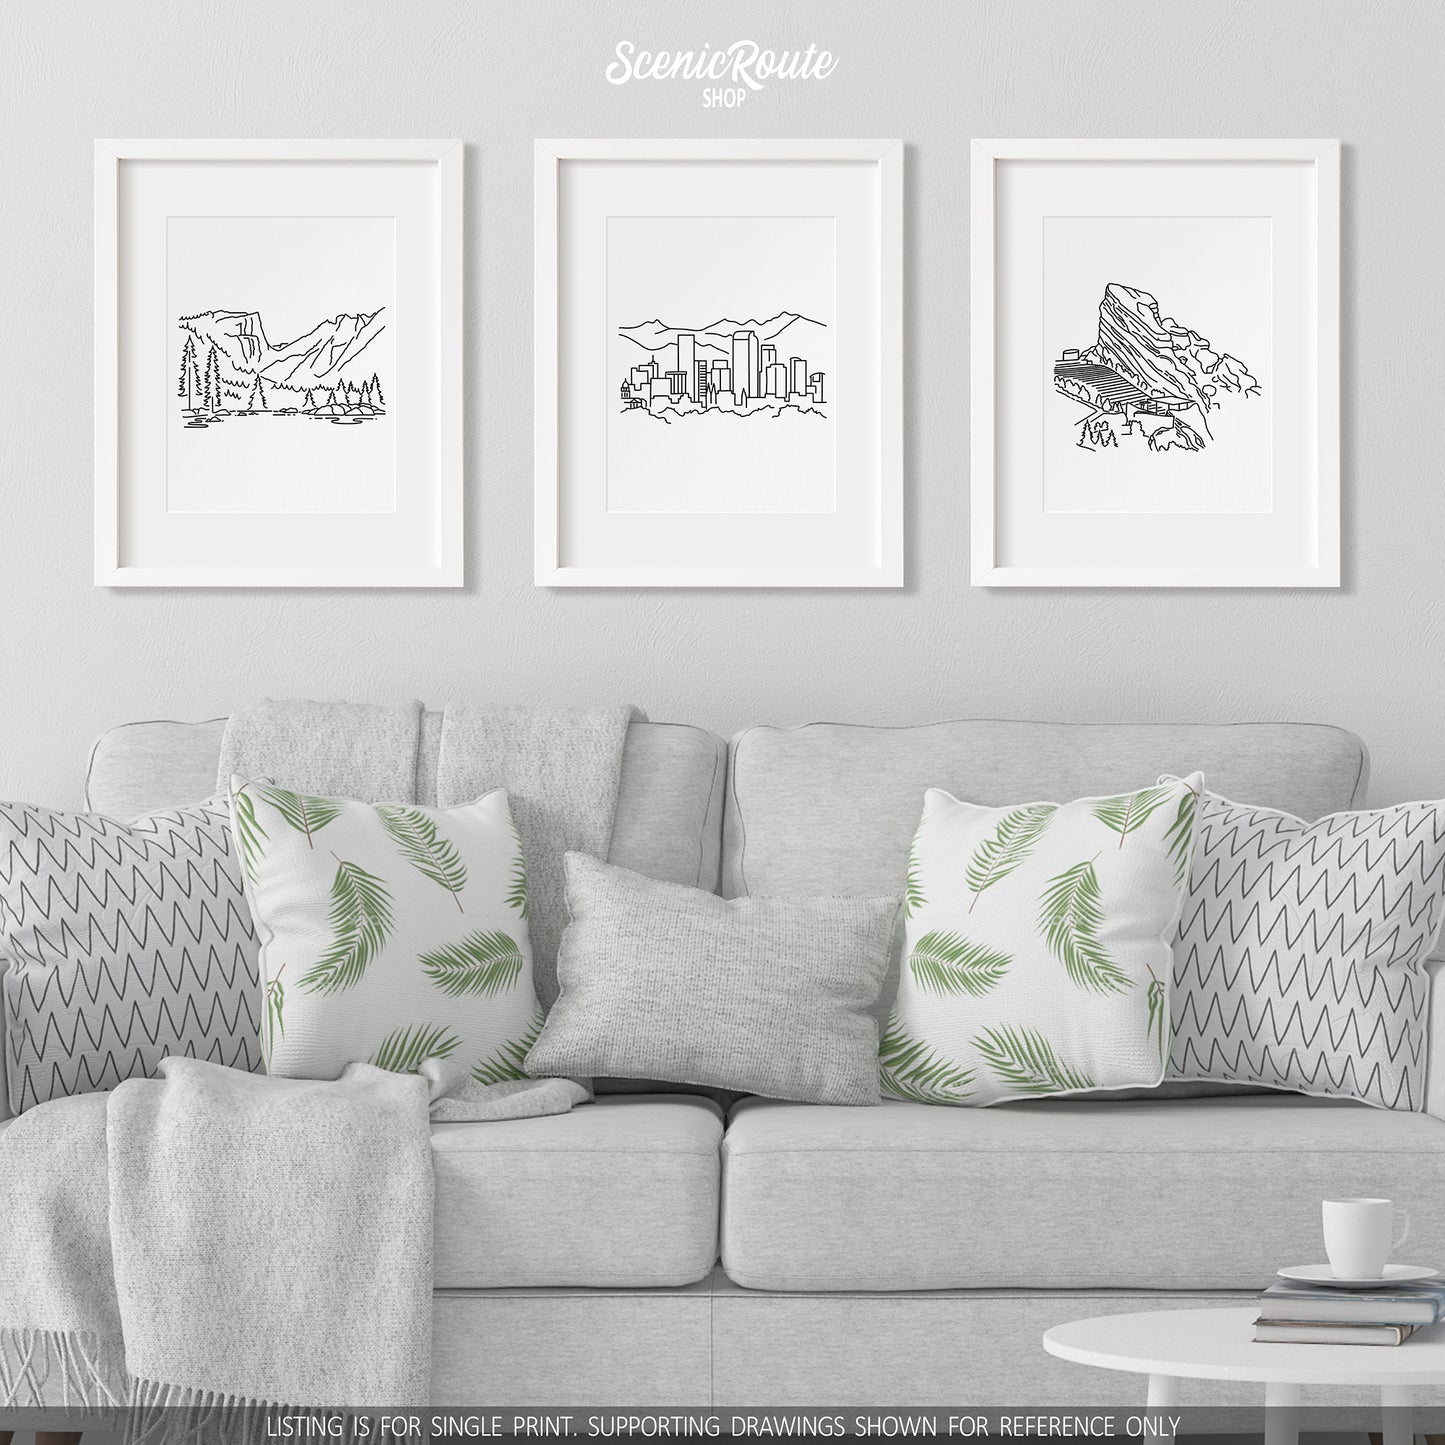 A group of three framed drawings on a wall hanging above a couch with pillows and a blanket. The line art drawings include Rocky Mountain National Park, the Denver Skyline, and Red Rocks Amphitheatre